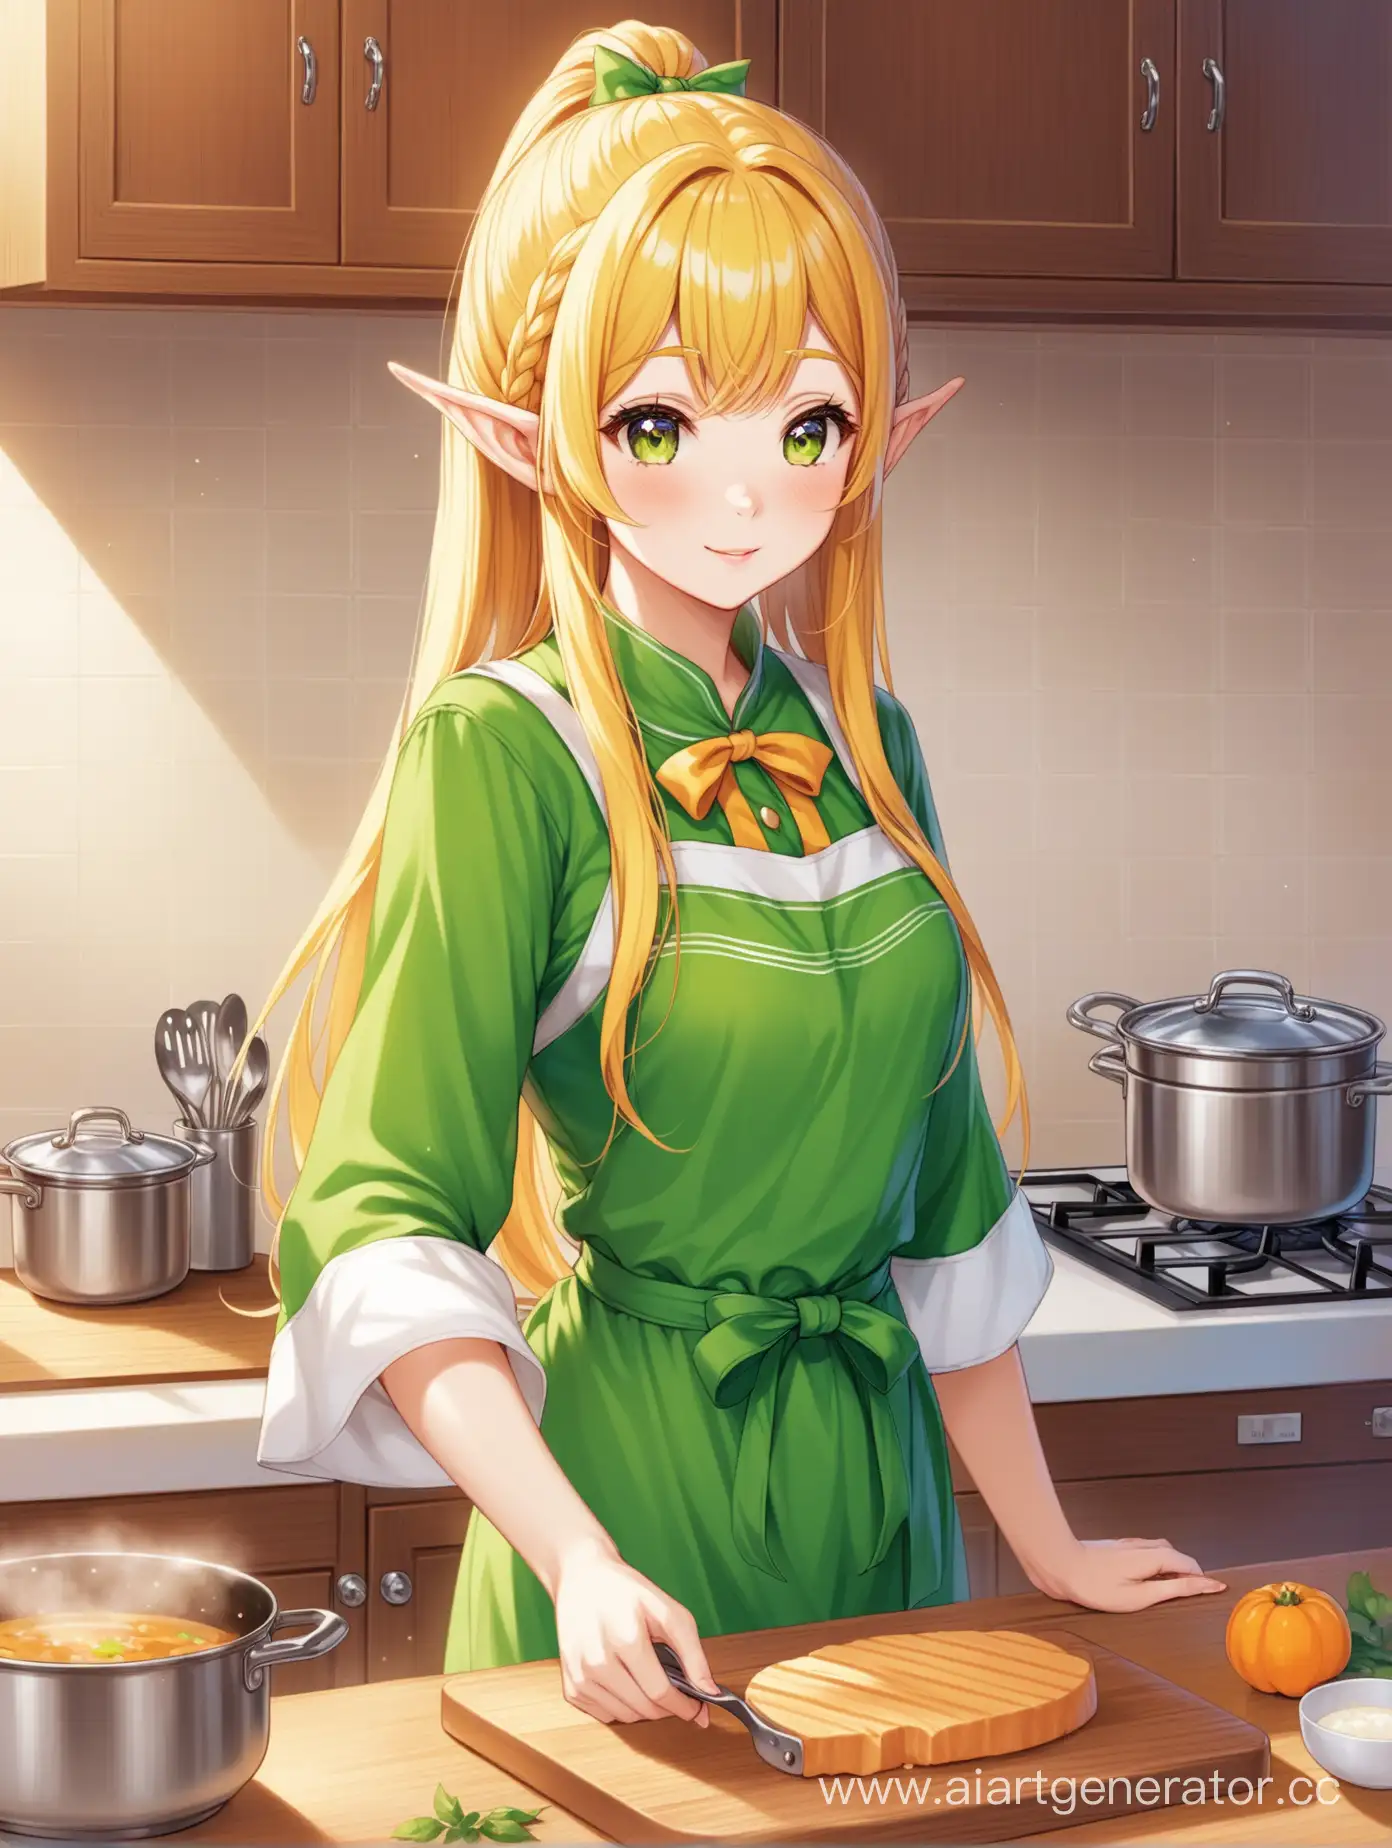 Elf-Girl-Baking-Delights-in-a-Whimsical-Kitchen